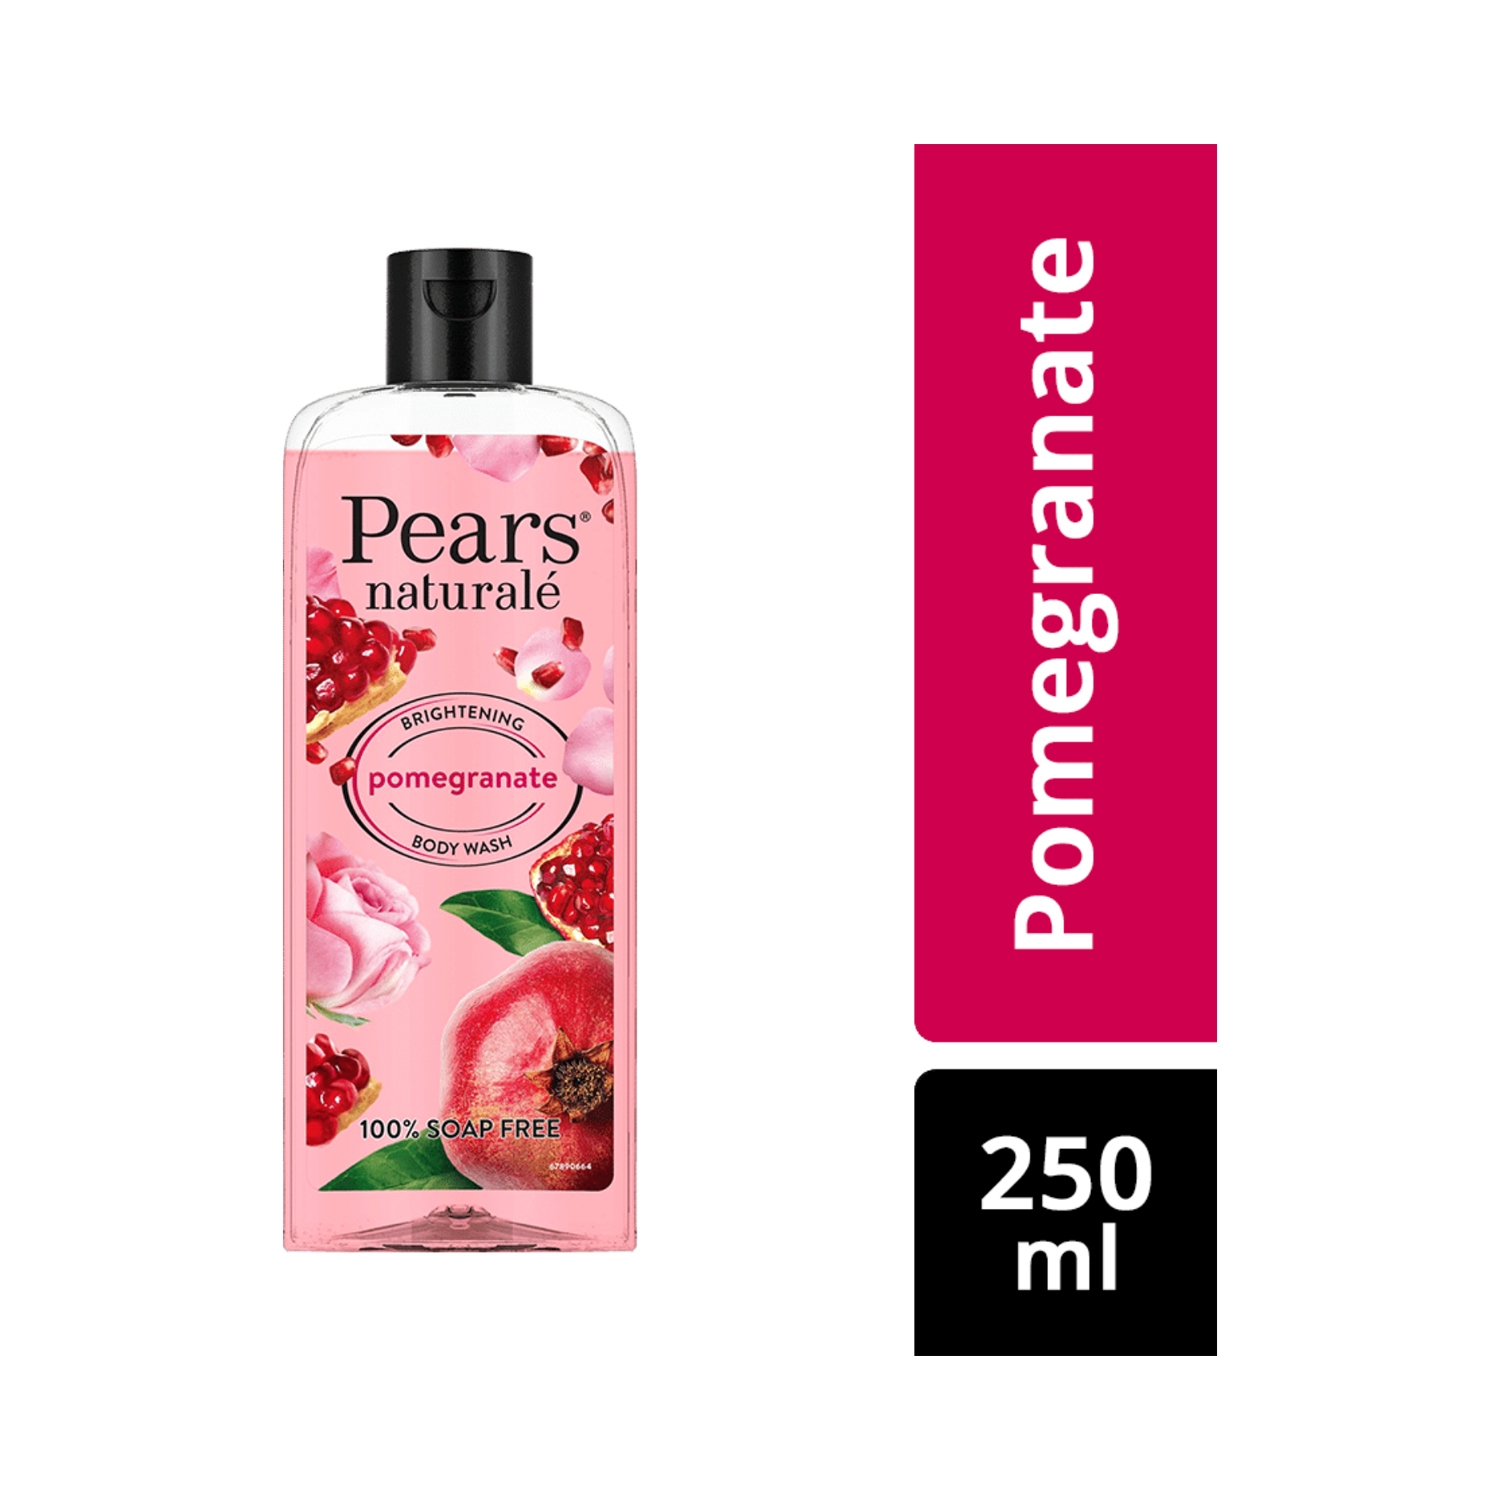 Pears | Pears Naturale Brightening Pomegranate Body Wash - (250ml)